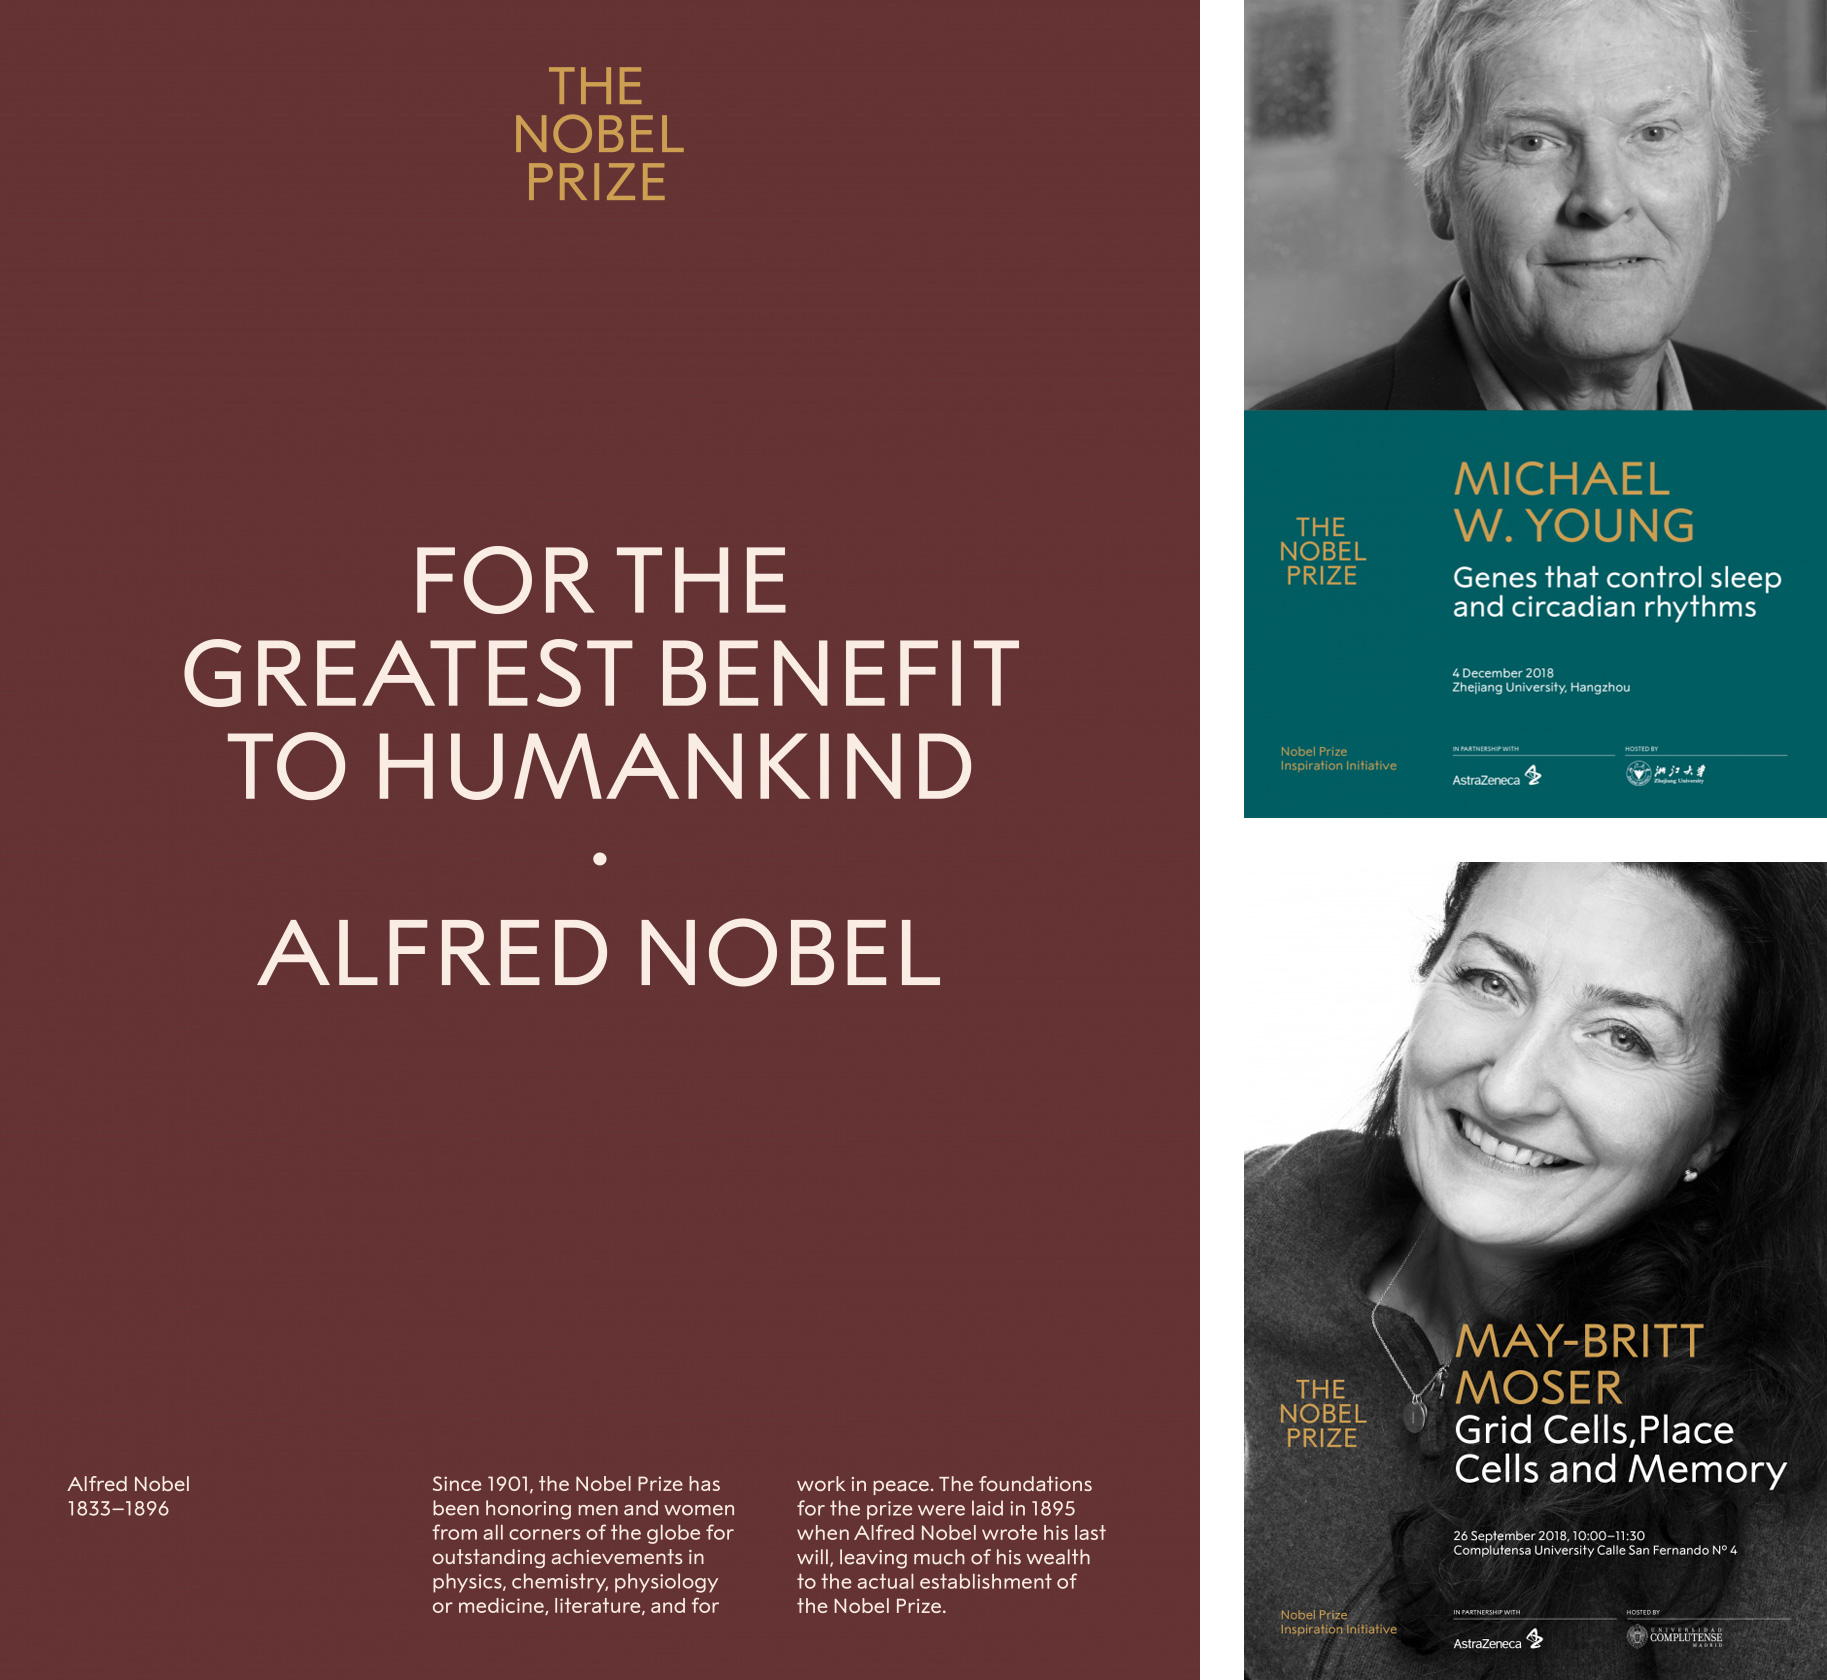 New Logo and Identity for The Nobel Prize by Stockholm Design Lab